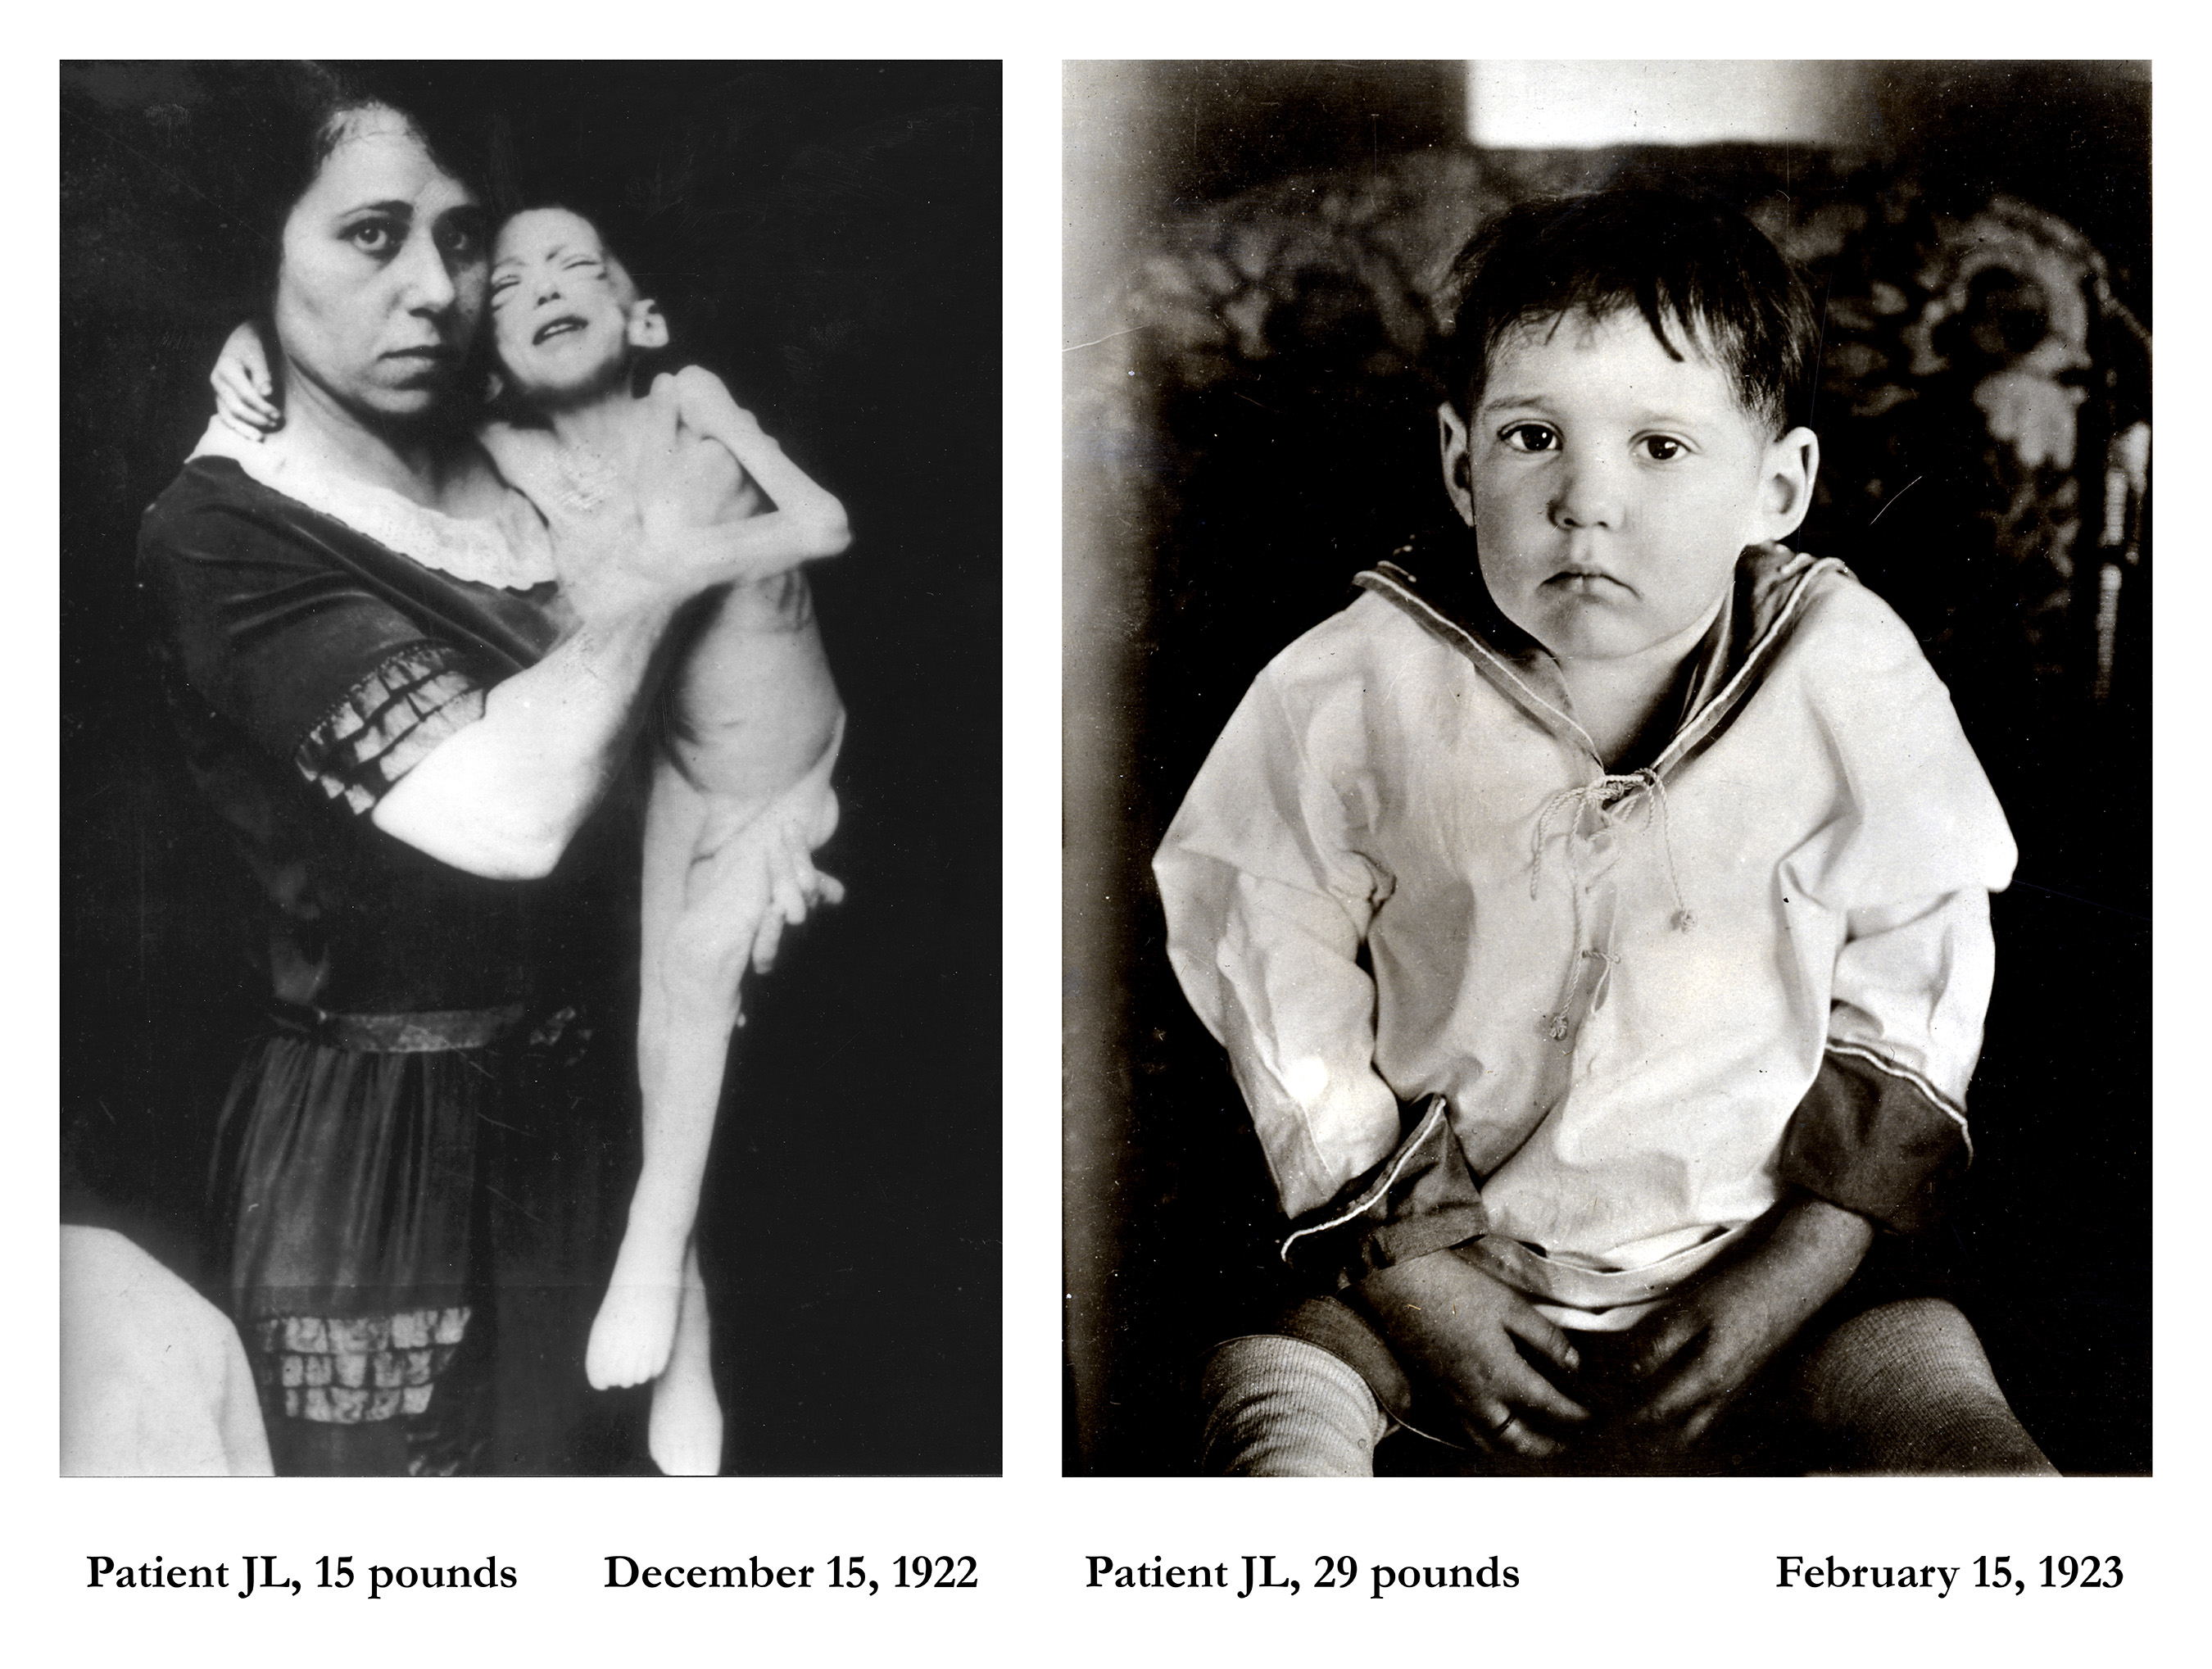 Less than 100 years ago, diabetes was a fatal disease with no treatment other than starvation. In 1923, Lilly collaborated with Canadian scientists Dr. Frederick Banting and Charles Best to overcome production challenges to introduce the world’s first commercial insulin product. Featured in this photo is J.L., a child with diabetes before, then two months after, taking insulin.